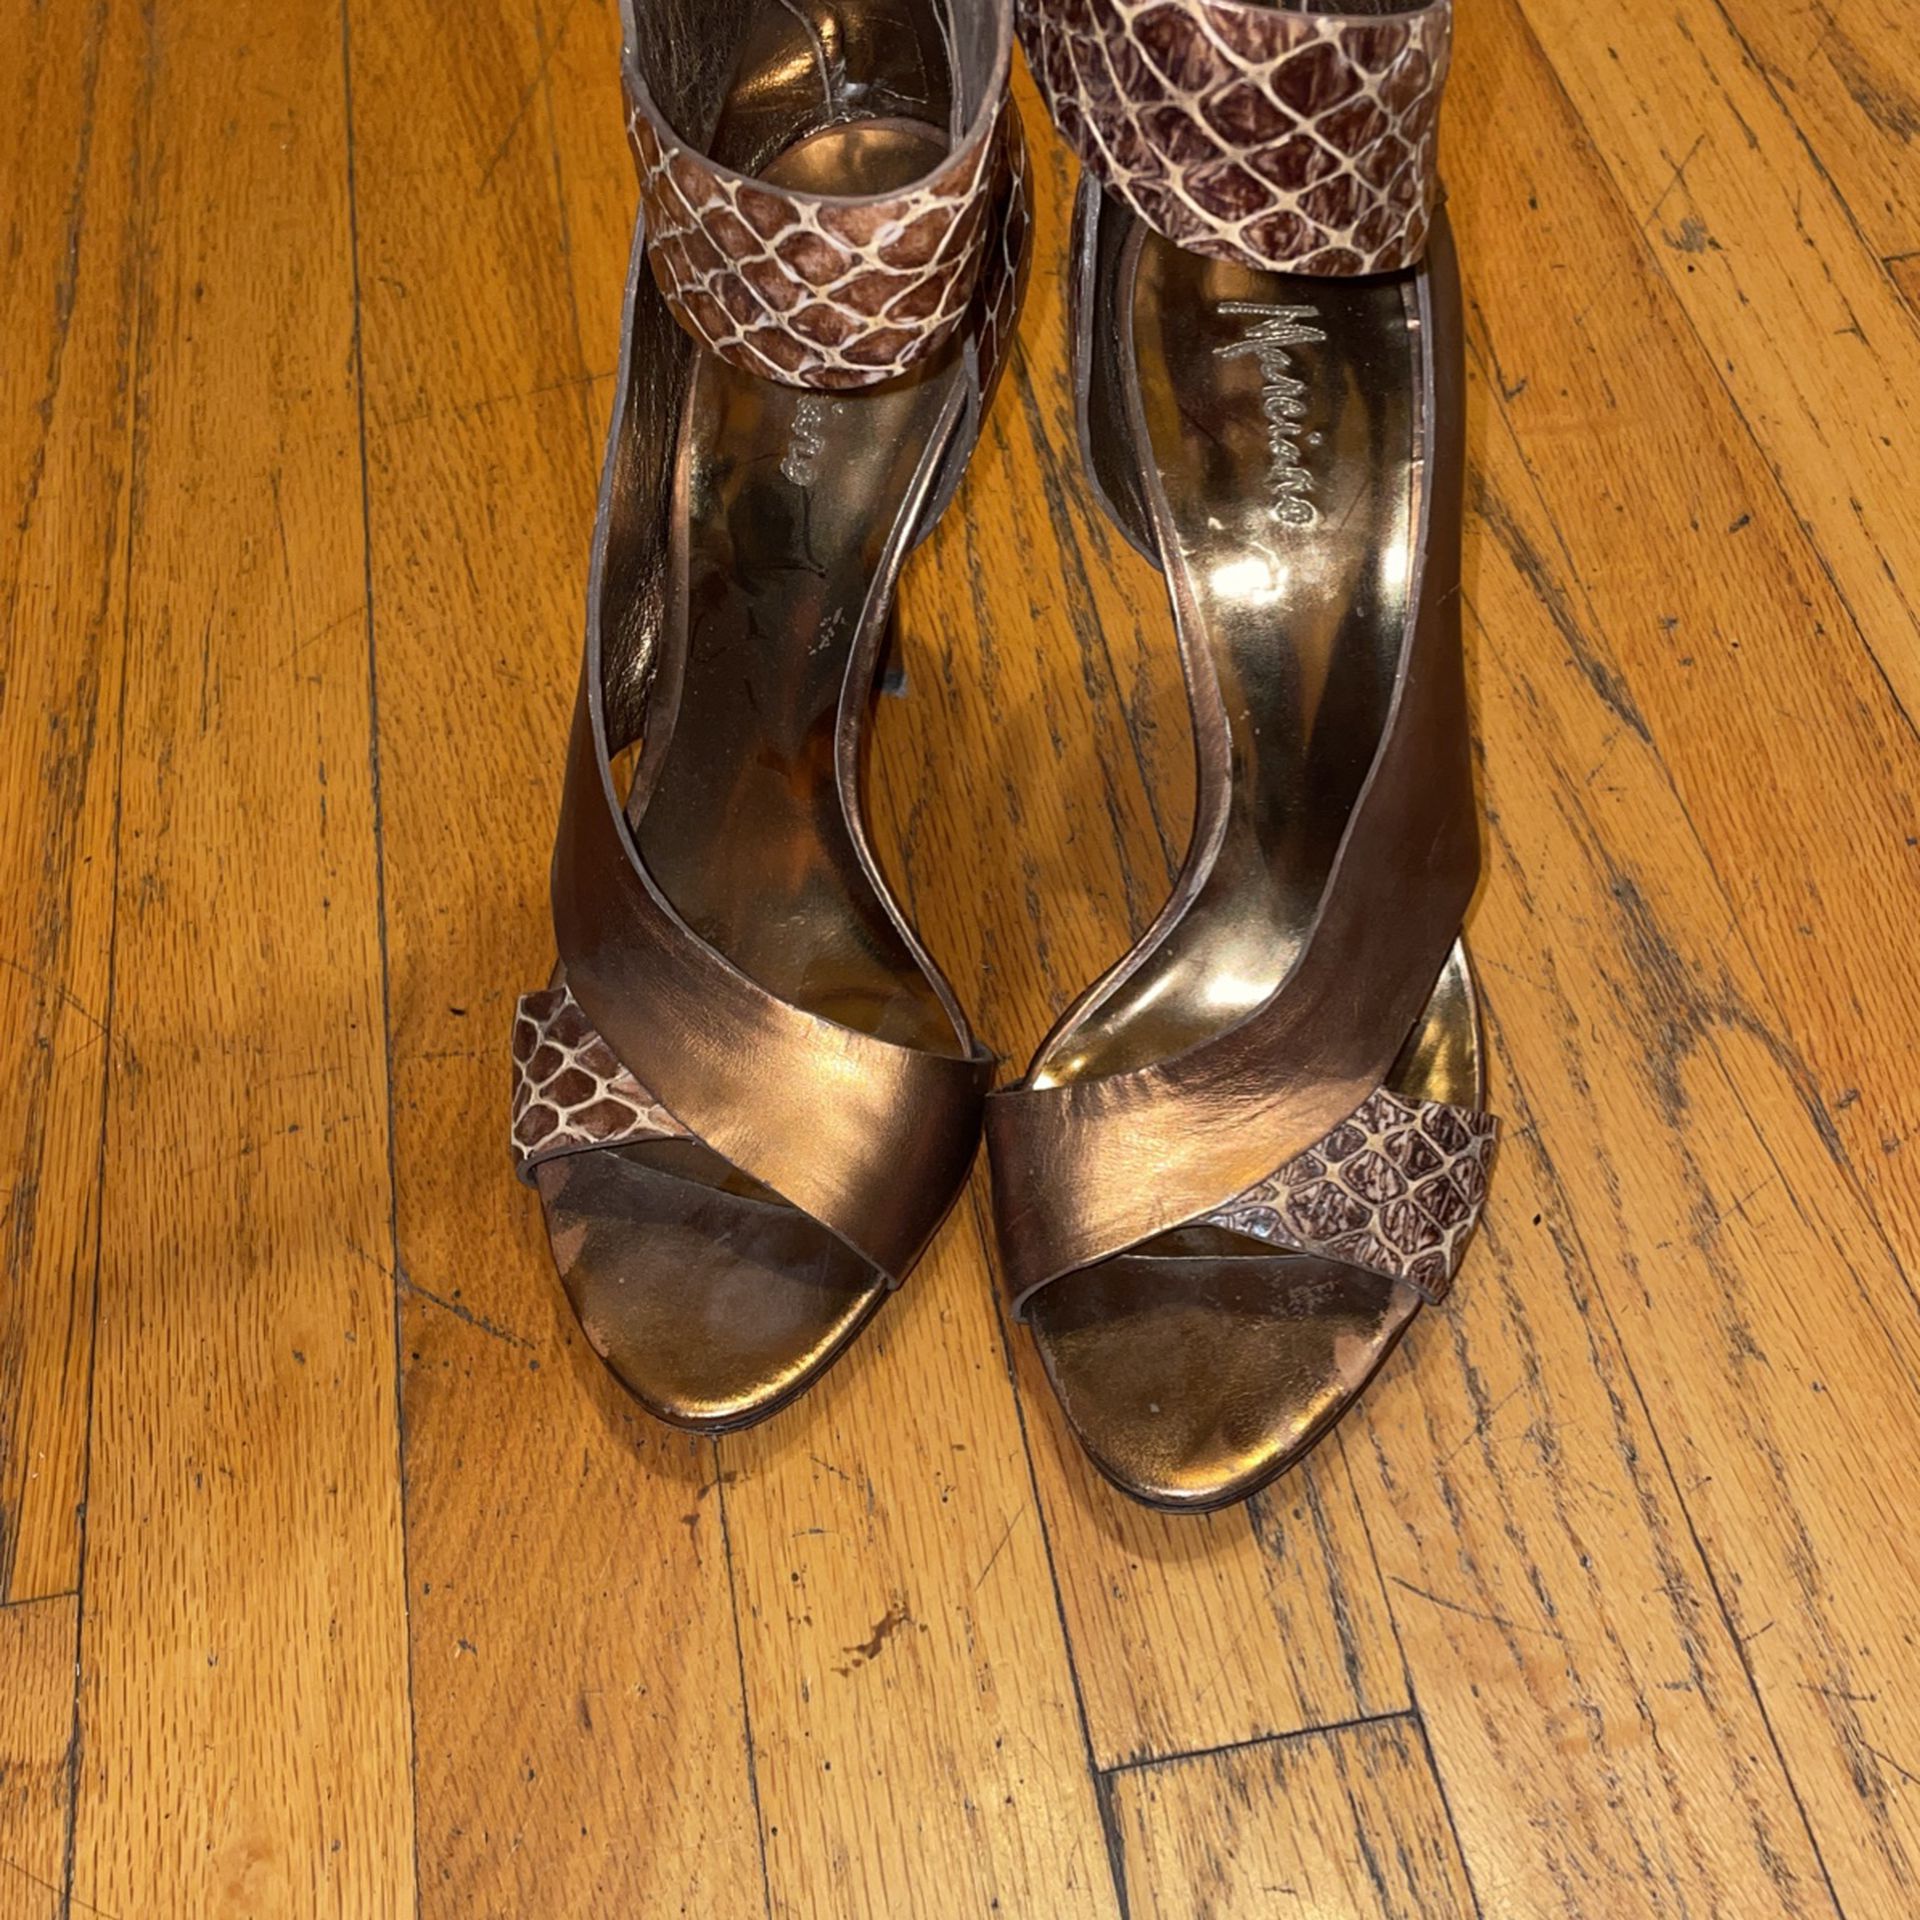 Bronze Marciano by Guess  Shoes Sz 7 